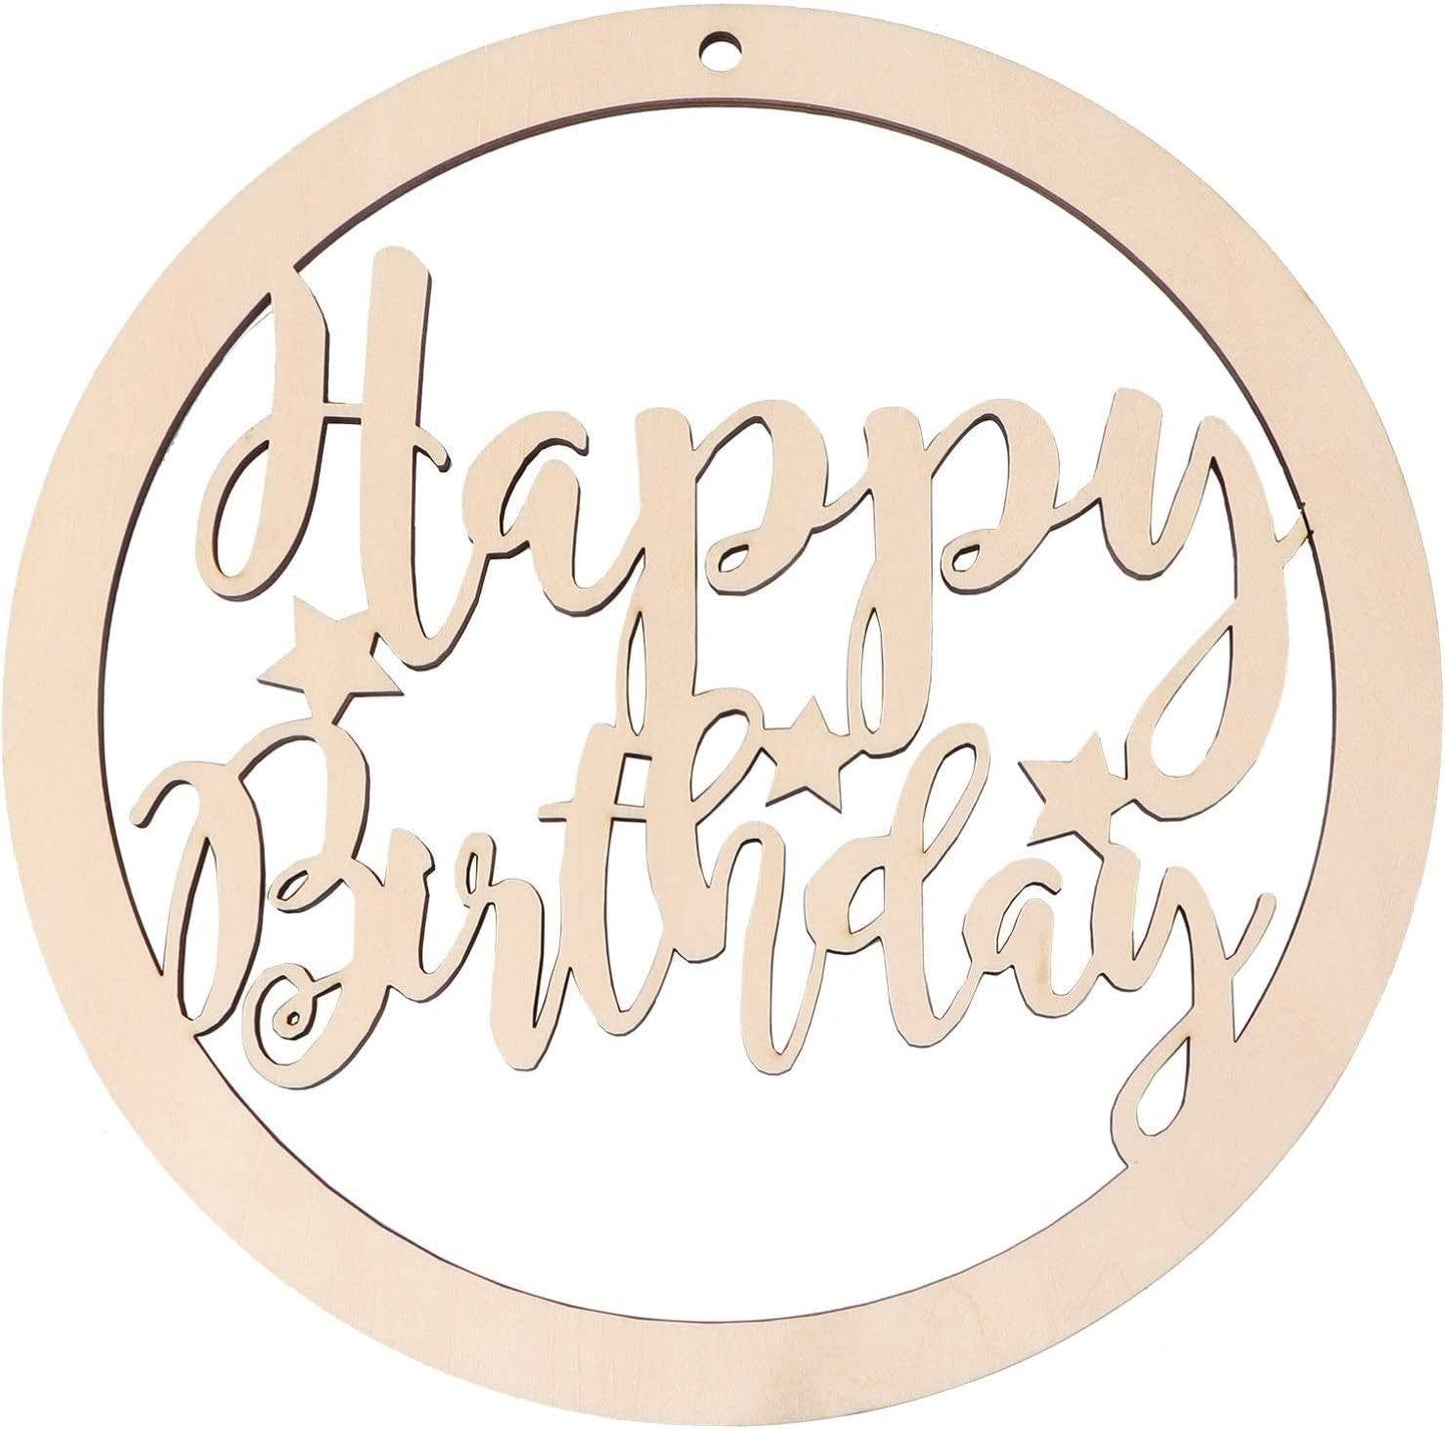 Happy Birthday Wooden Sign Letters Wall Decorations Vintage Rustic Birthday Hanging Ornament - WoodArtSupply